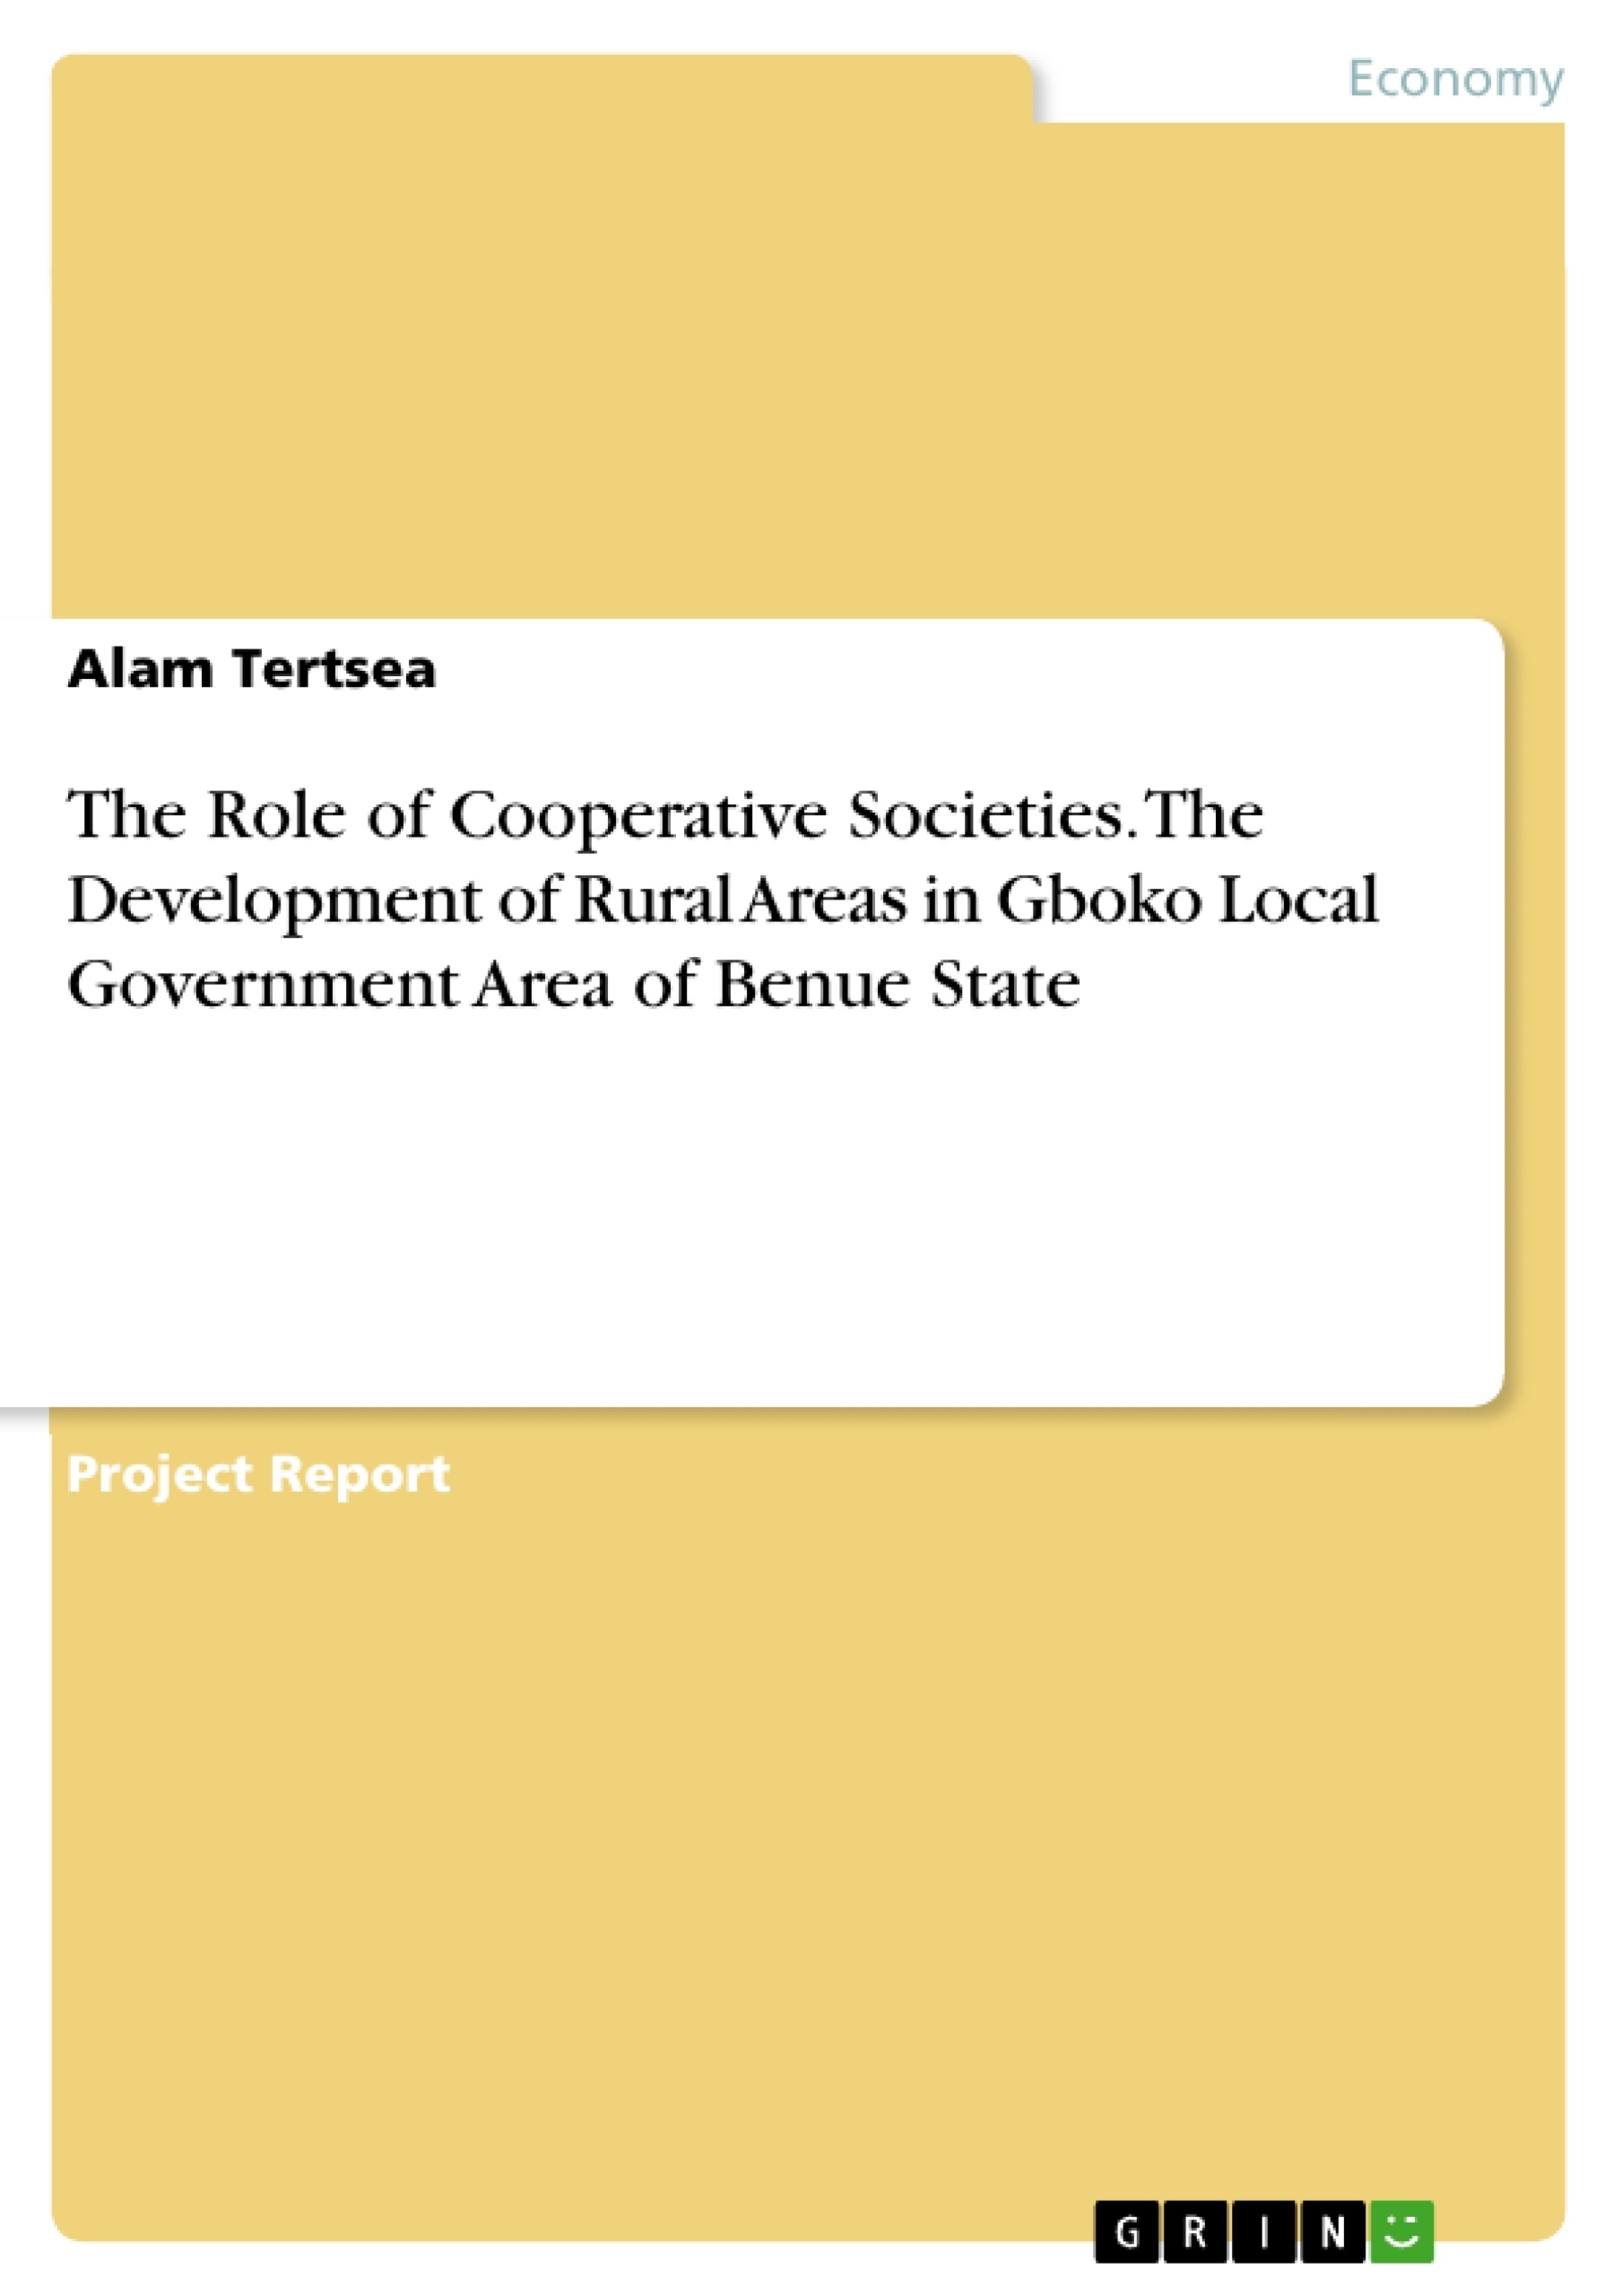 Title: The Role of Cooperative Societies. The Development of Rural Areas in
Gboko Local Government Area of Benue State